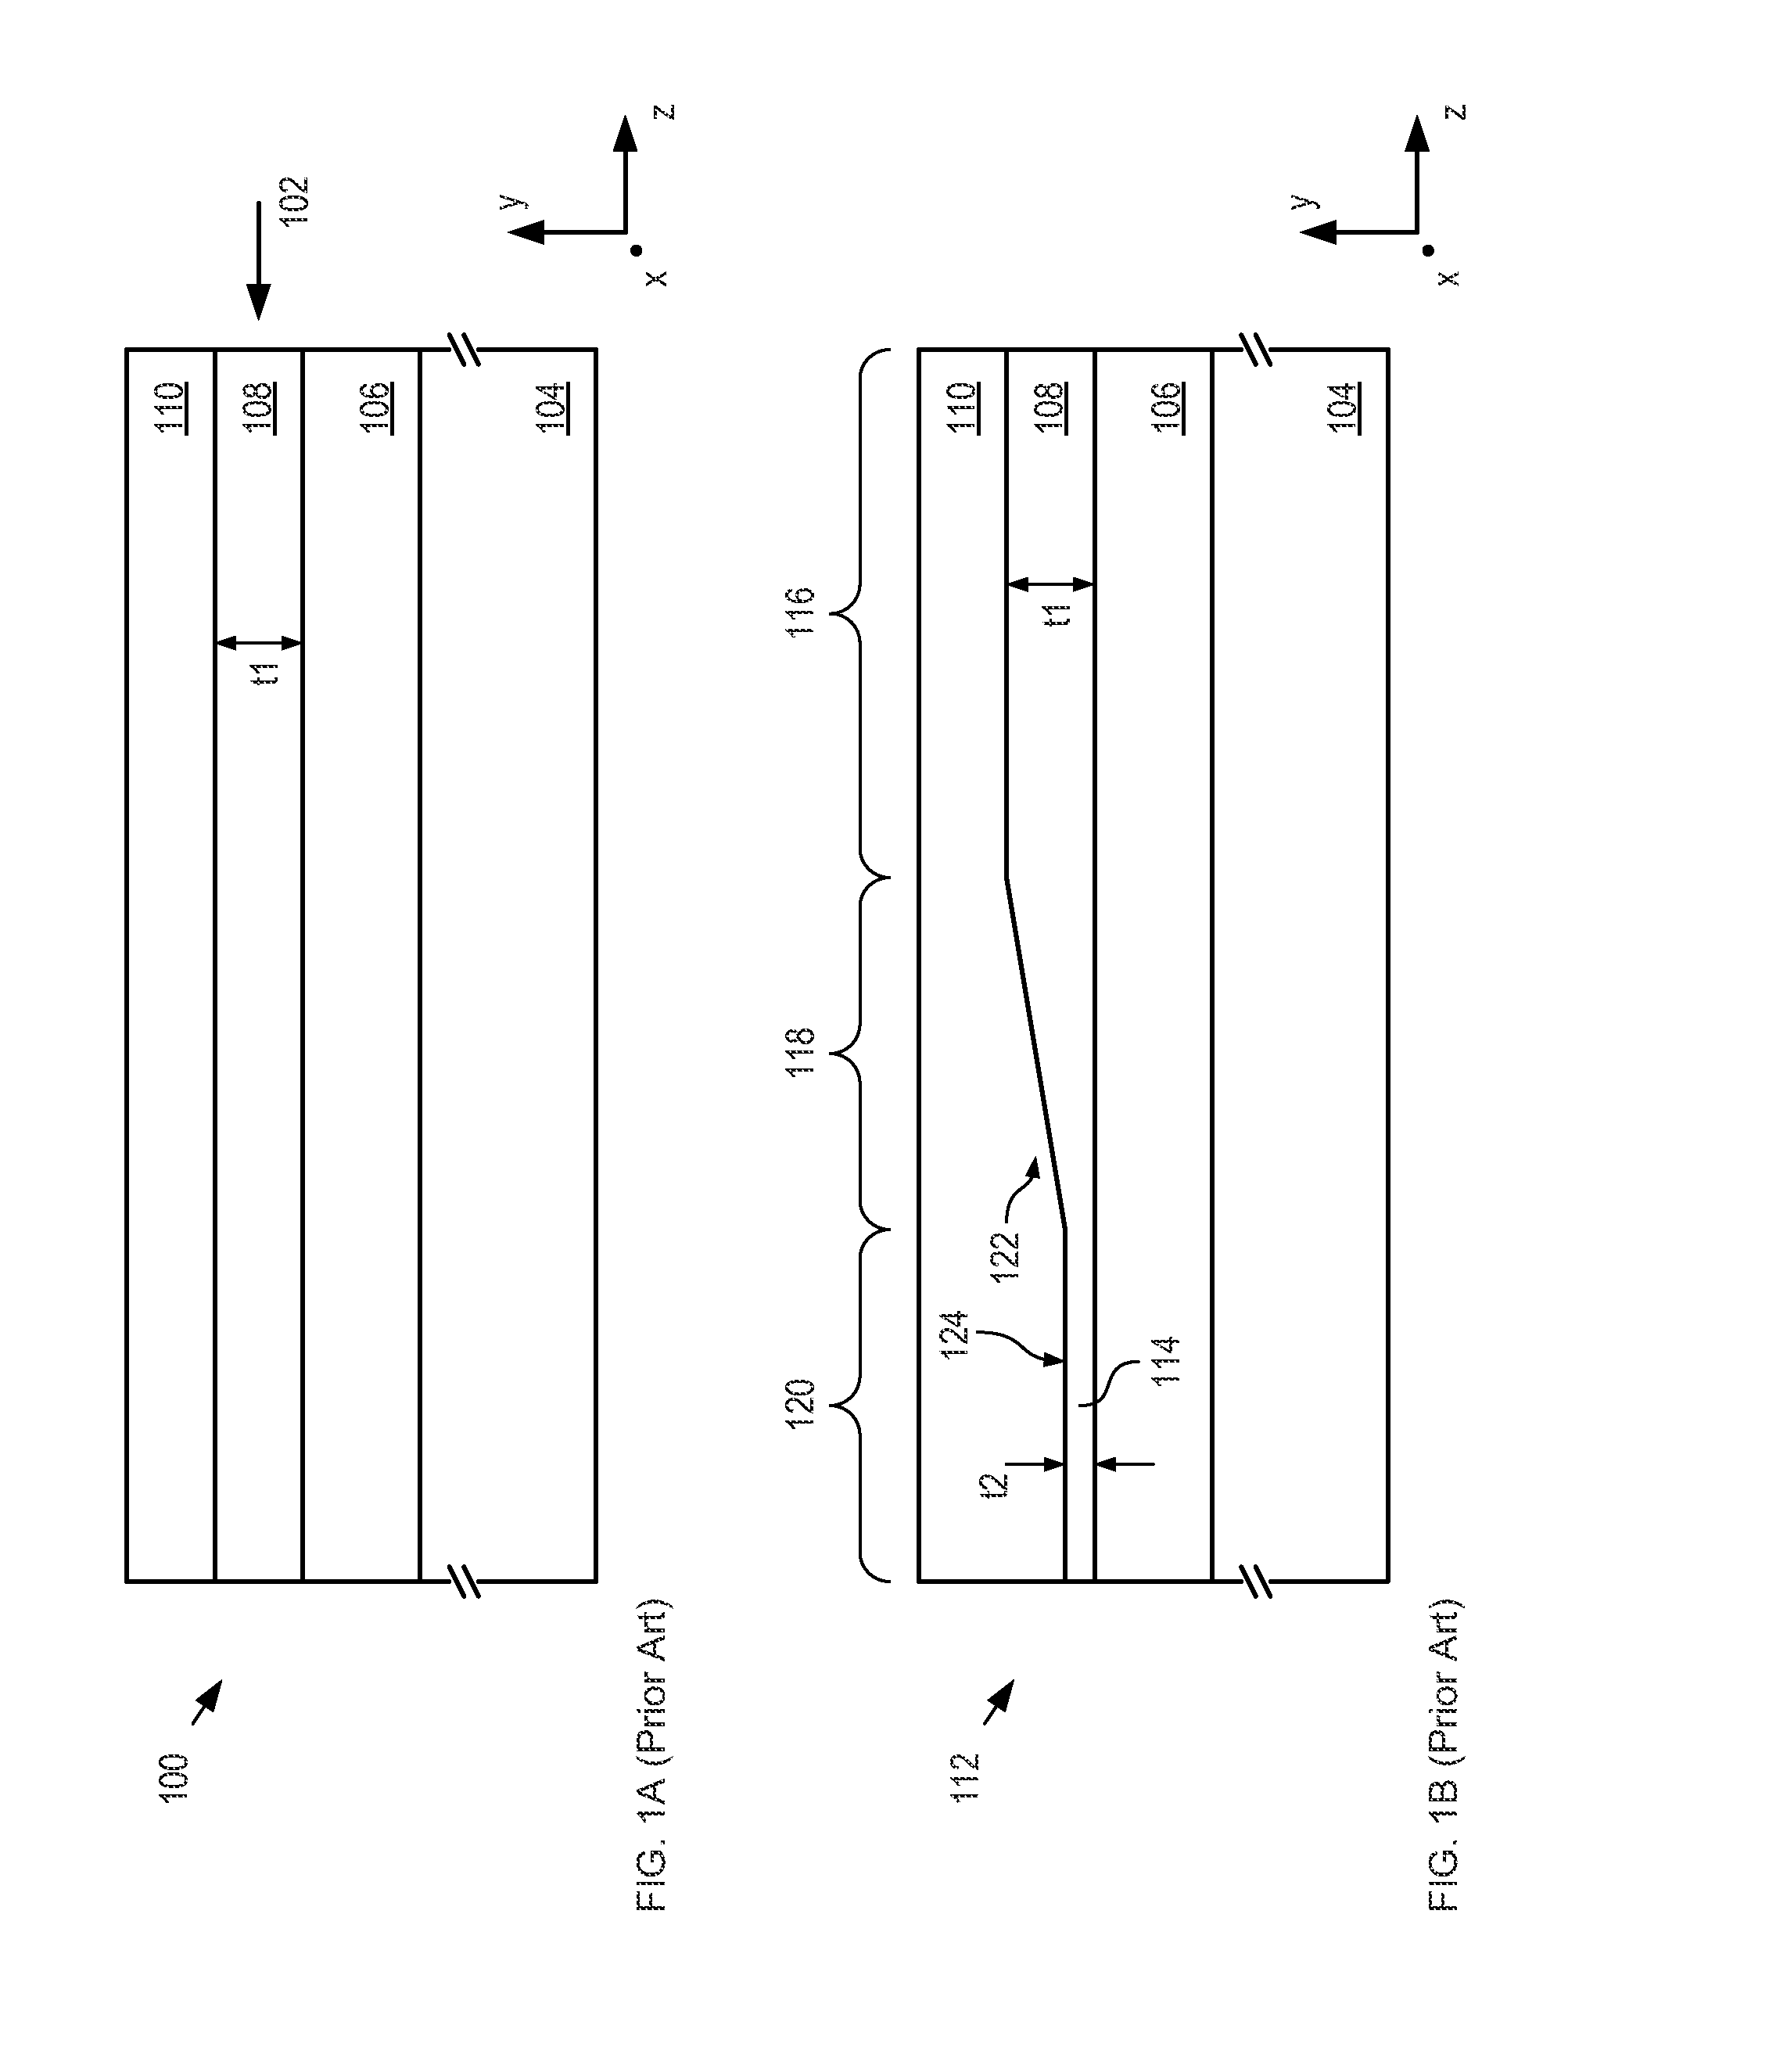 Surface waveguide having a tapered region and method of forming